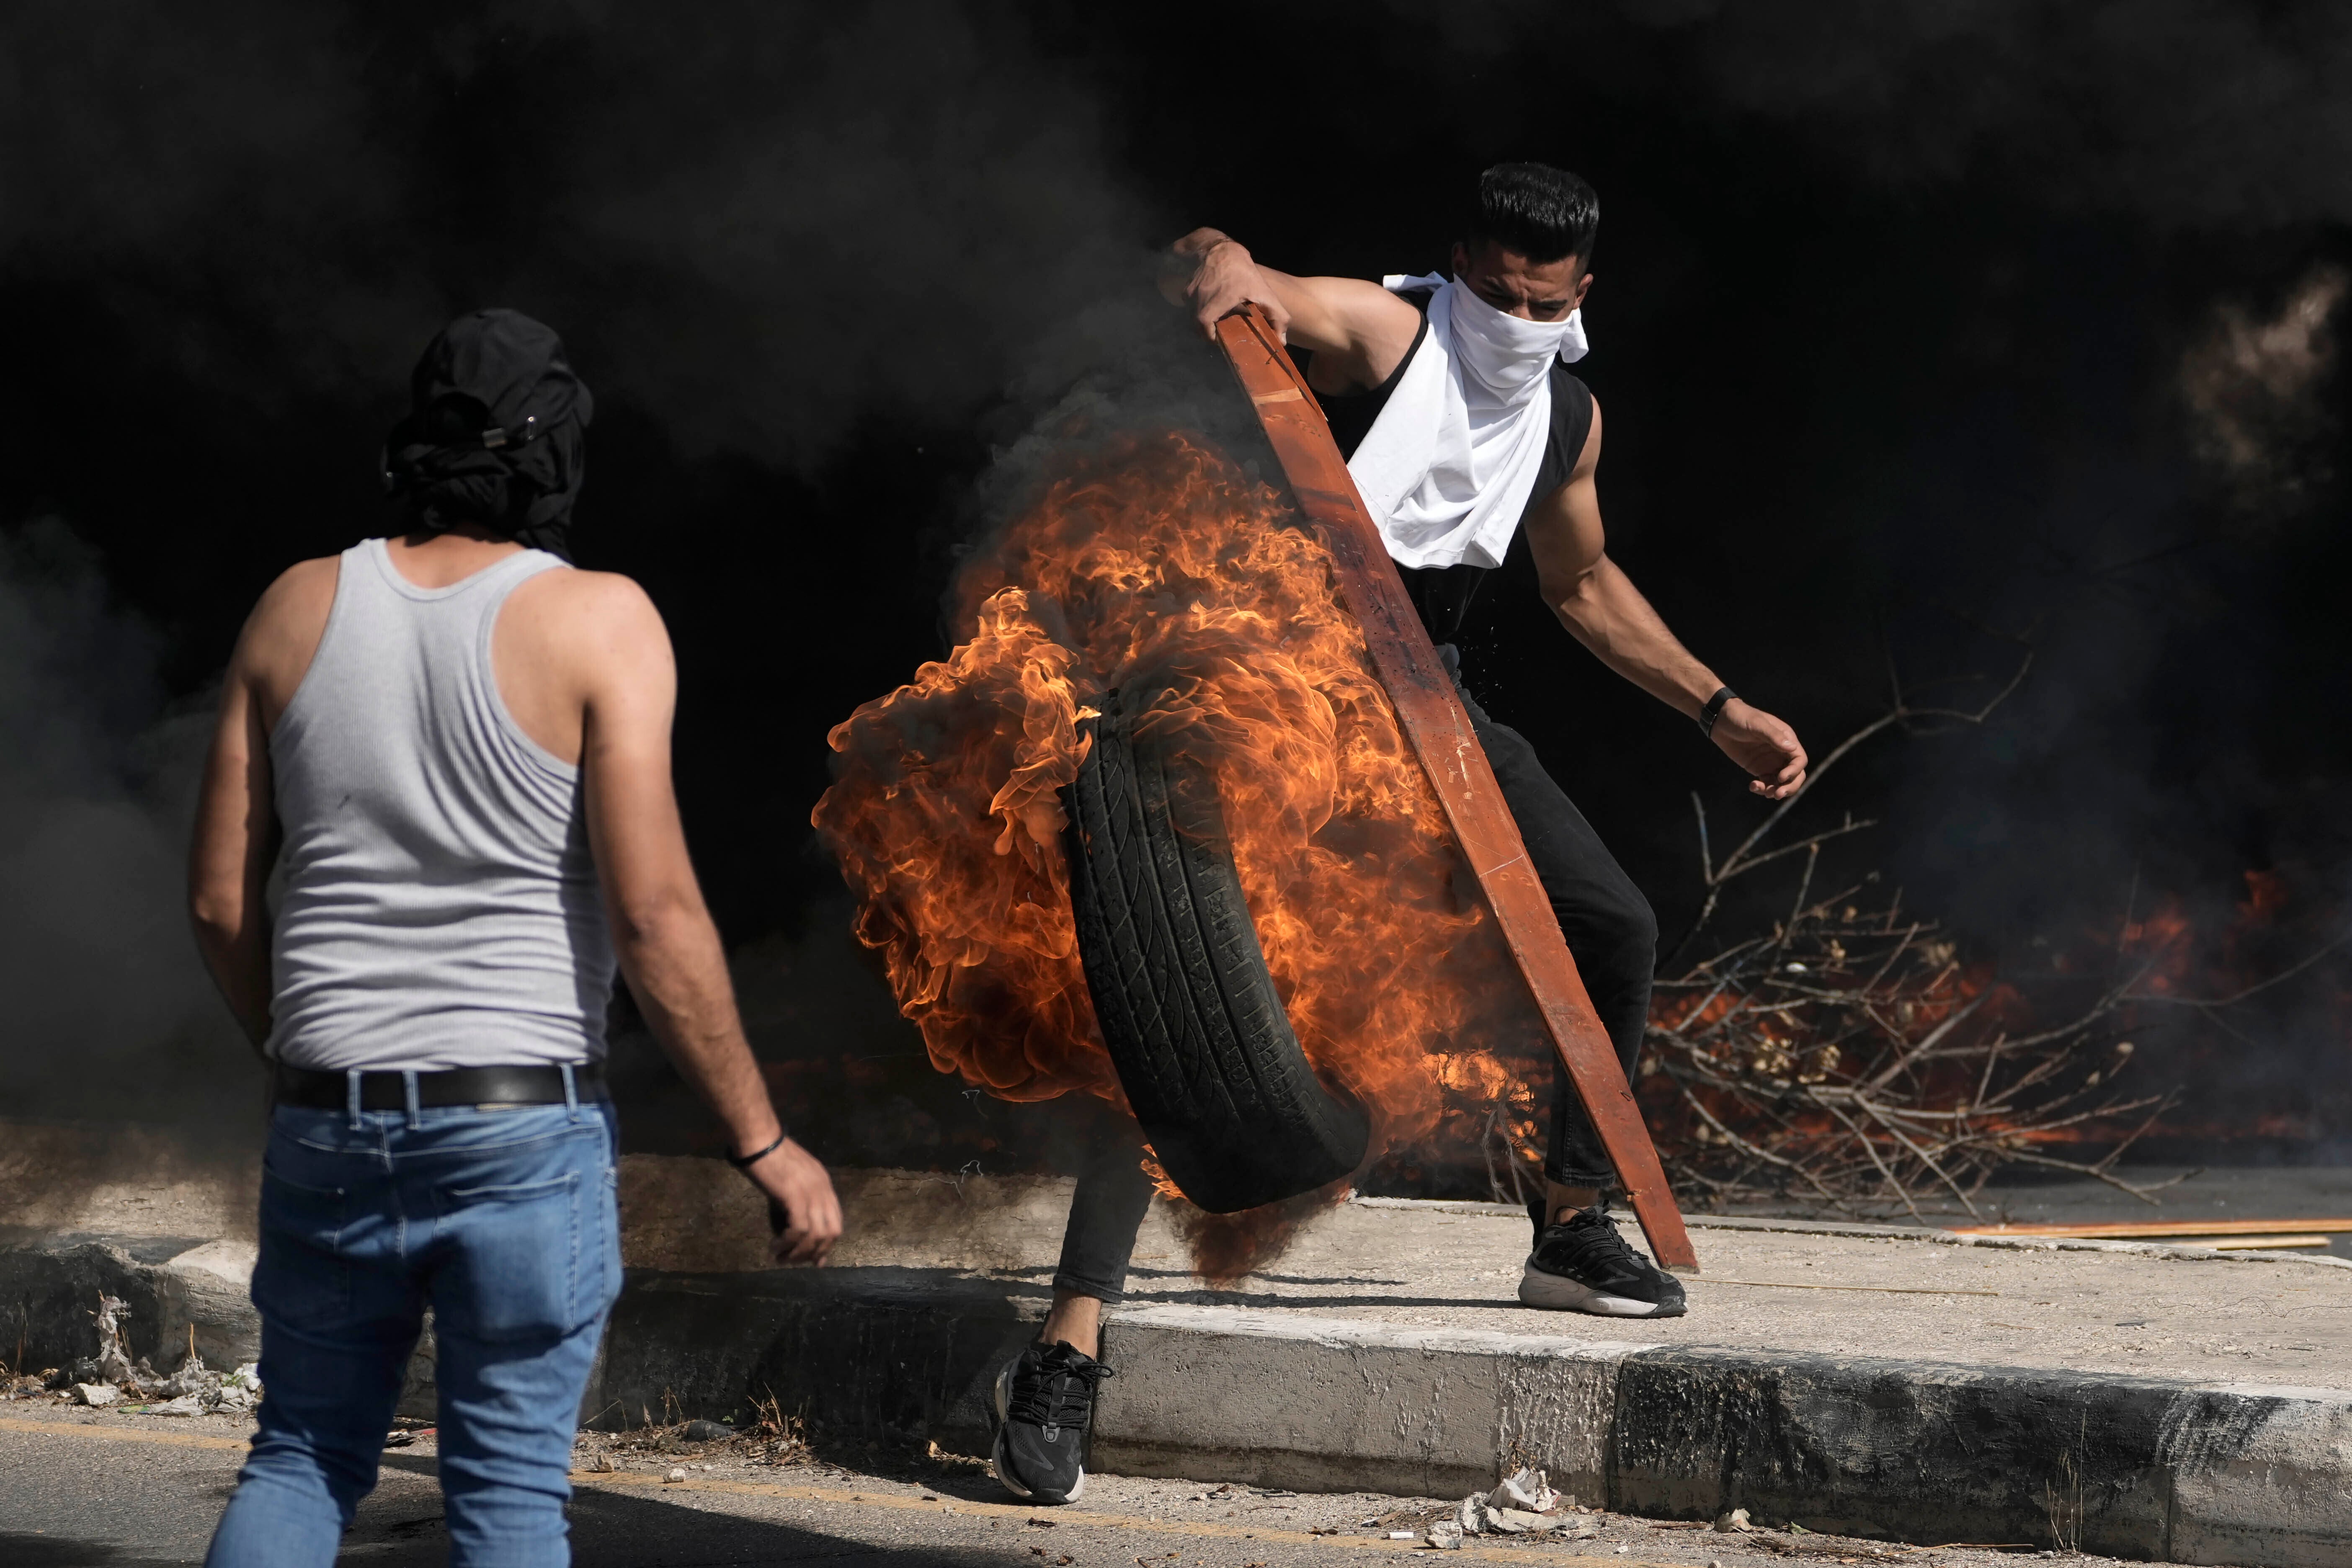 Palestinians clash with Israeli forces in the West Bank city of Nablus on Friday